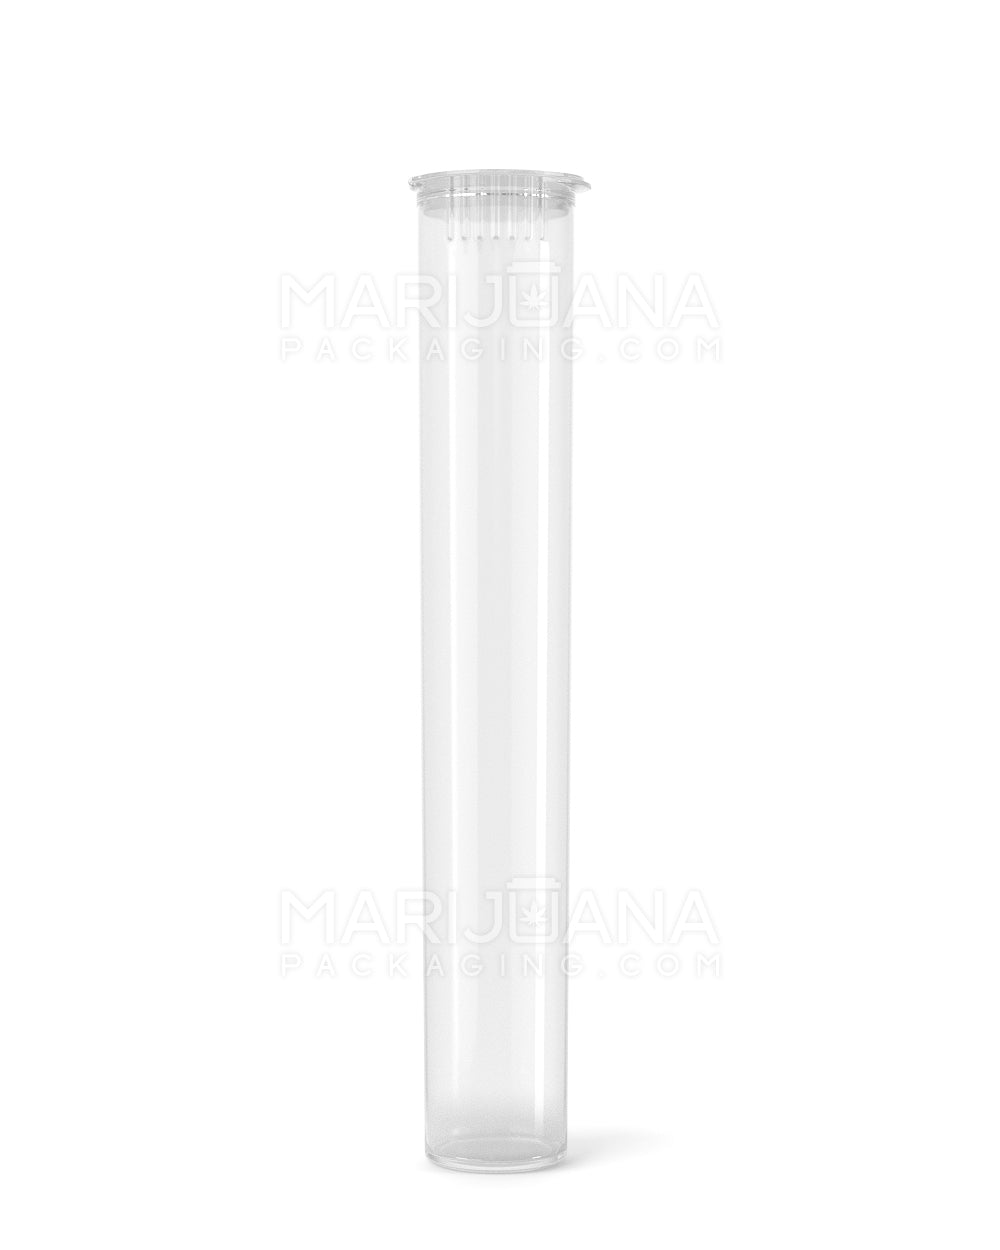 Child Resistant | King Size Pop Top Plastic Pre-Roll Tubes | 116mm - Clear - 1000 Count - 4